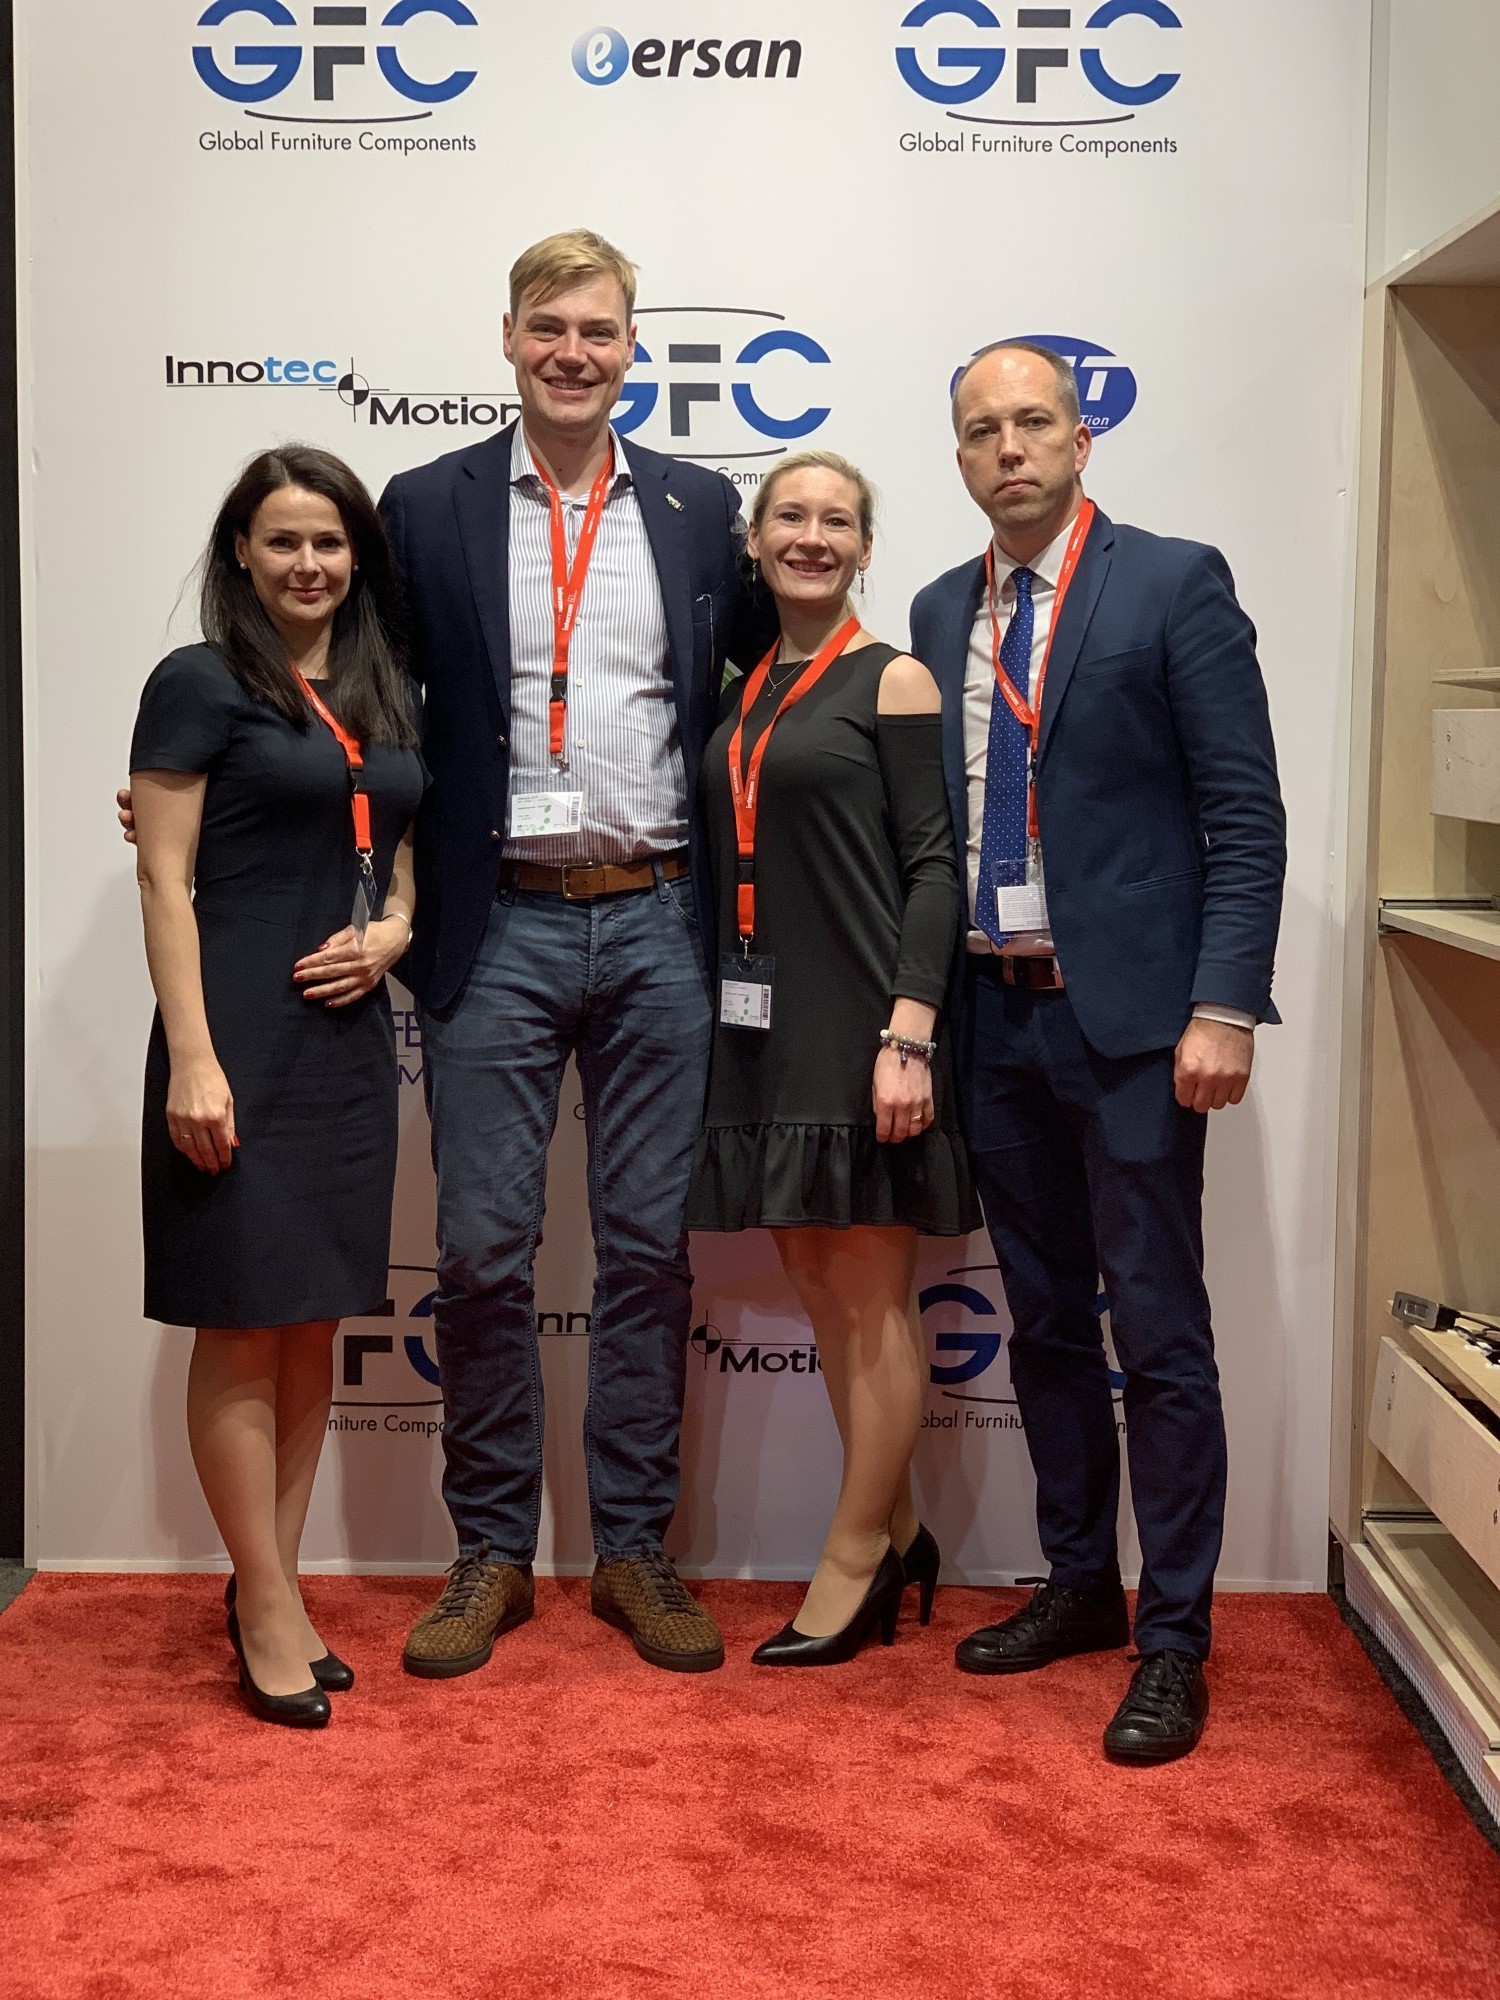 GREAT 2019 INTERZUM COLOGNE SHOWING FOR GFC